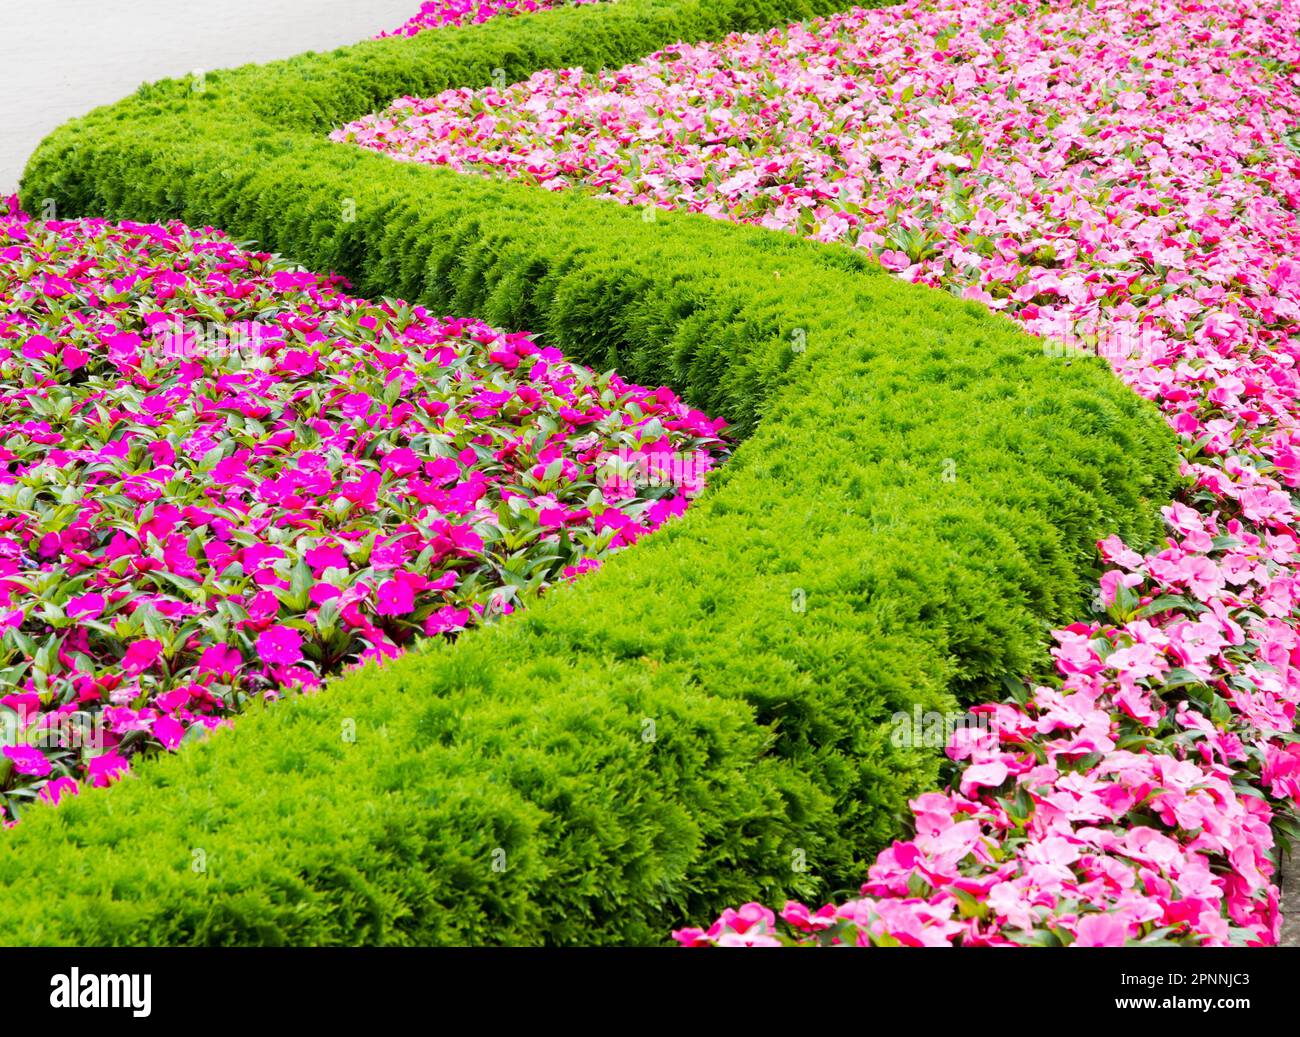 Flowerbed with a pattern forming a sinuous line Stock Photo